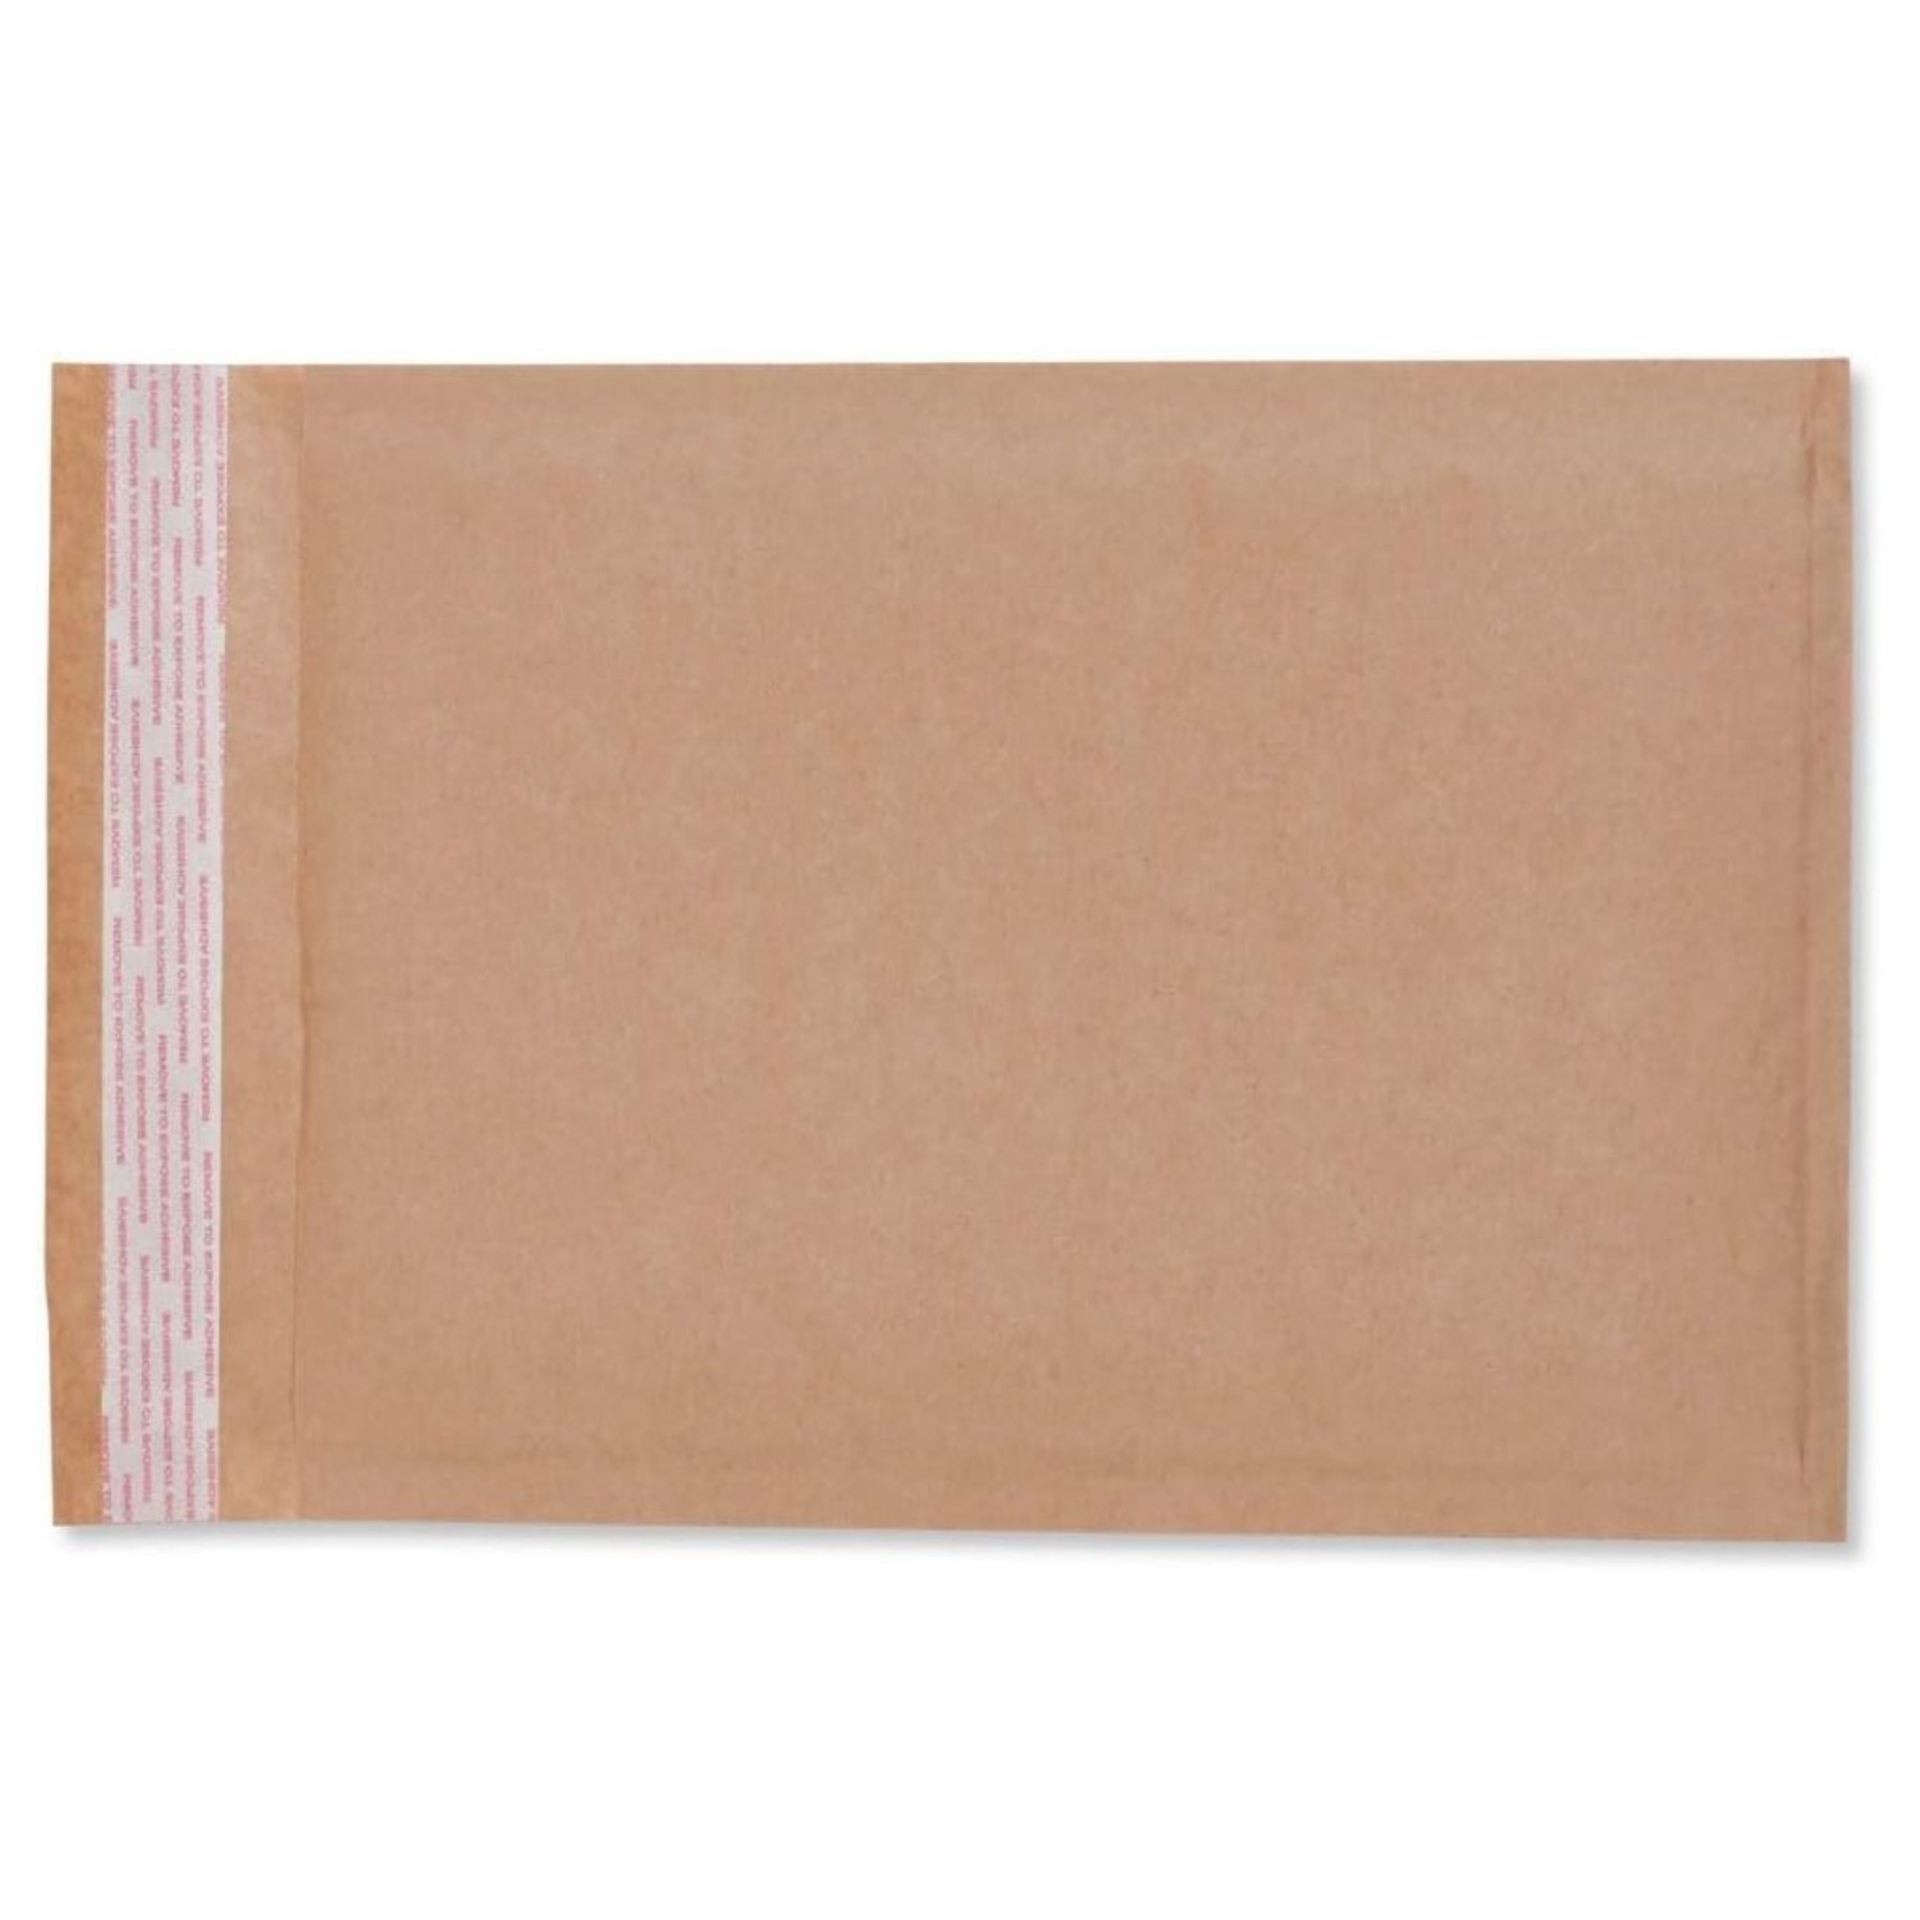 1000 BUBBLE ENVELOPES WITH PEEL AND SEAL TOUGH LIGHT PADDED (140 X 210MM) - Image 4 of 4